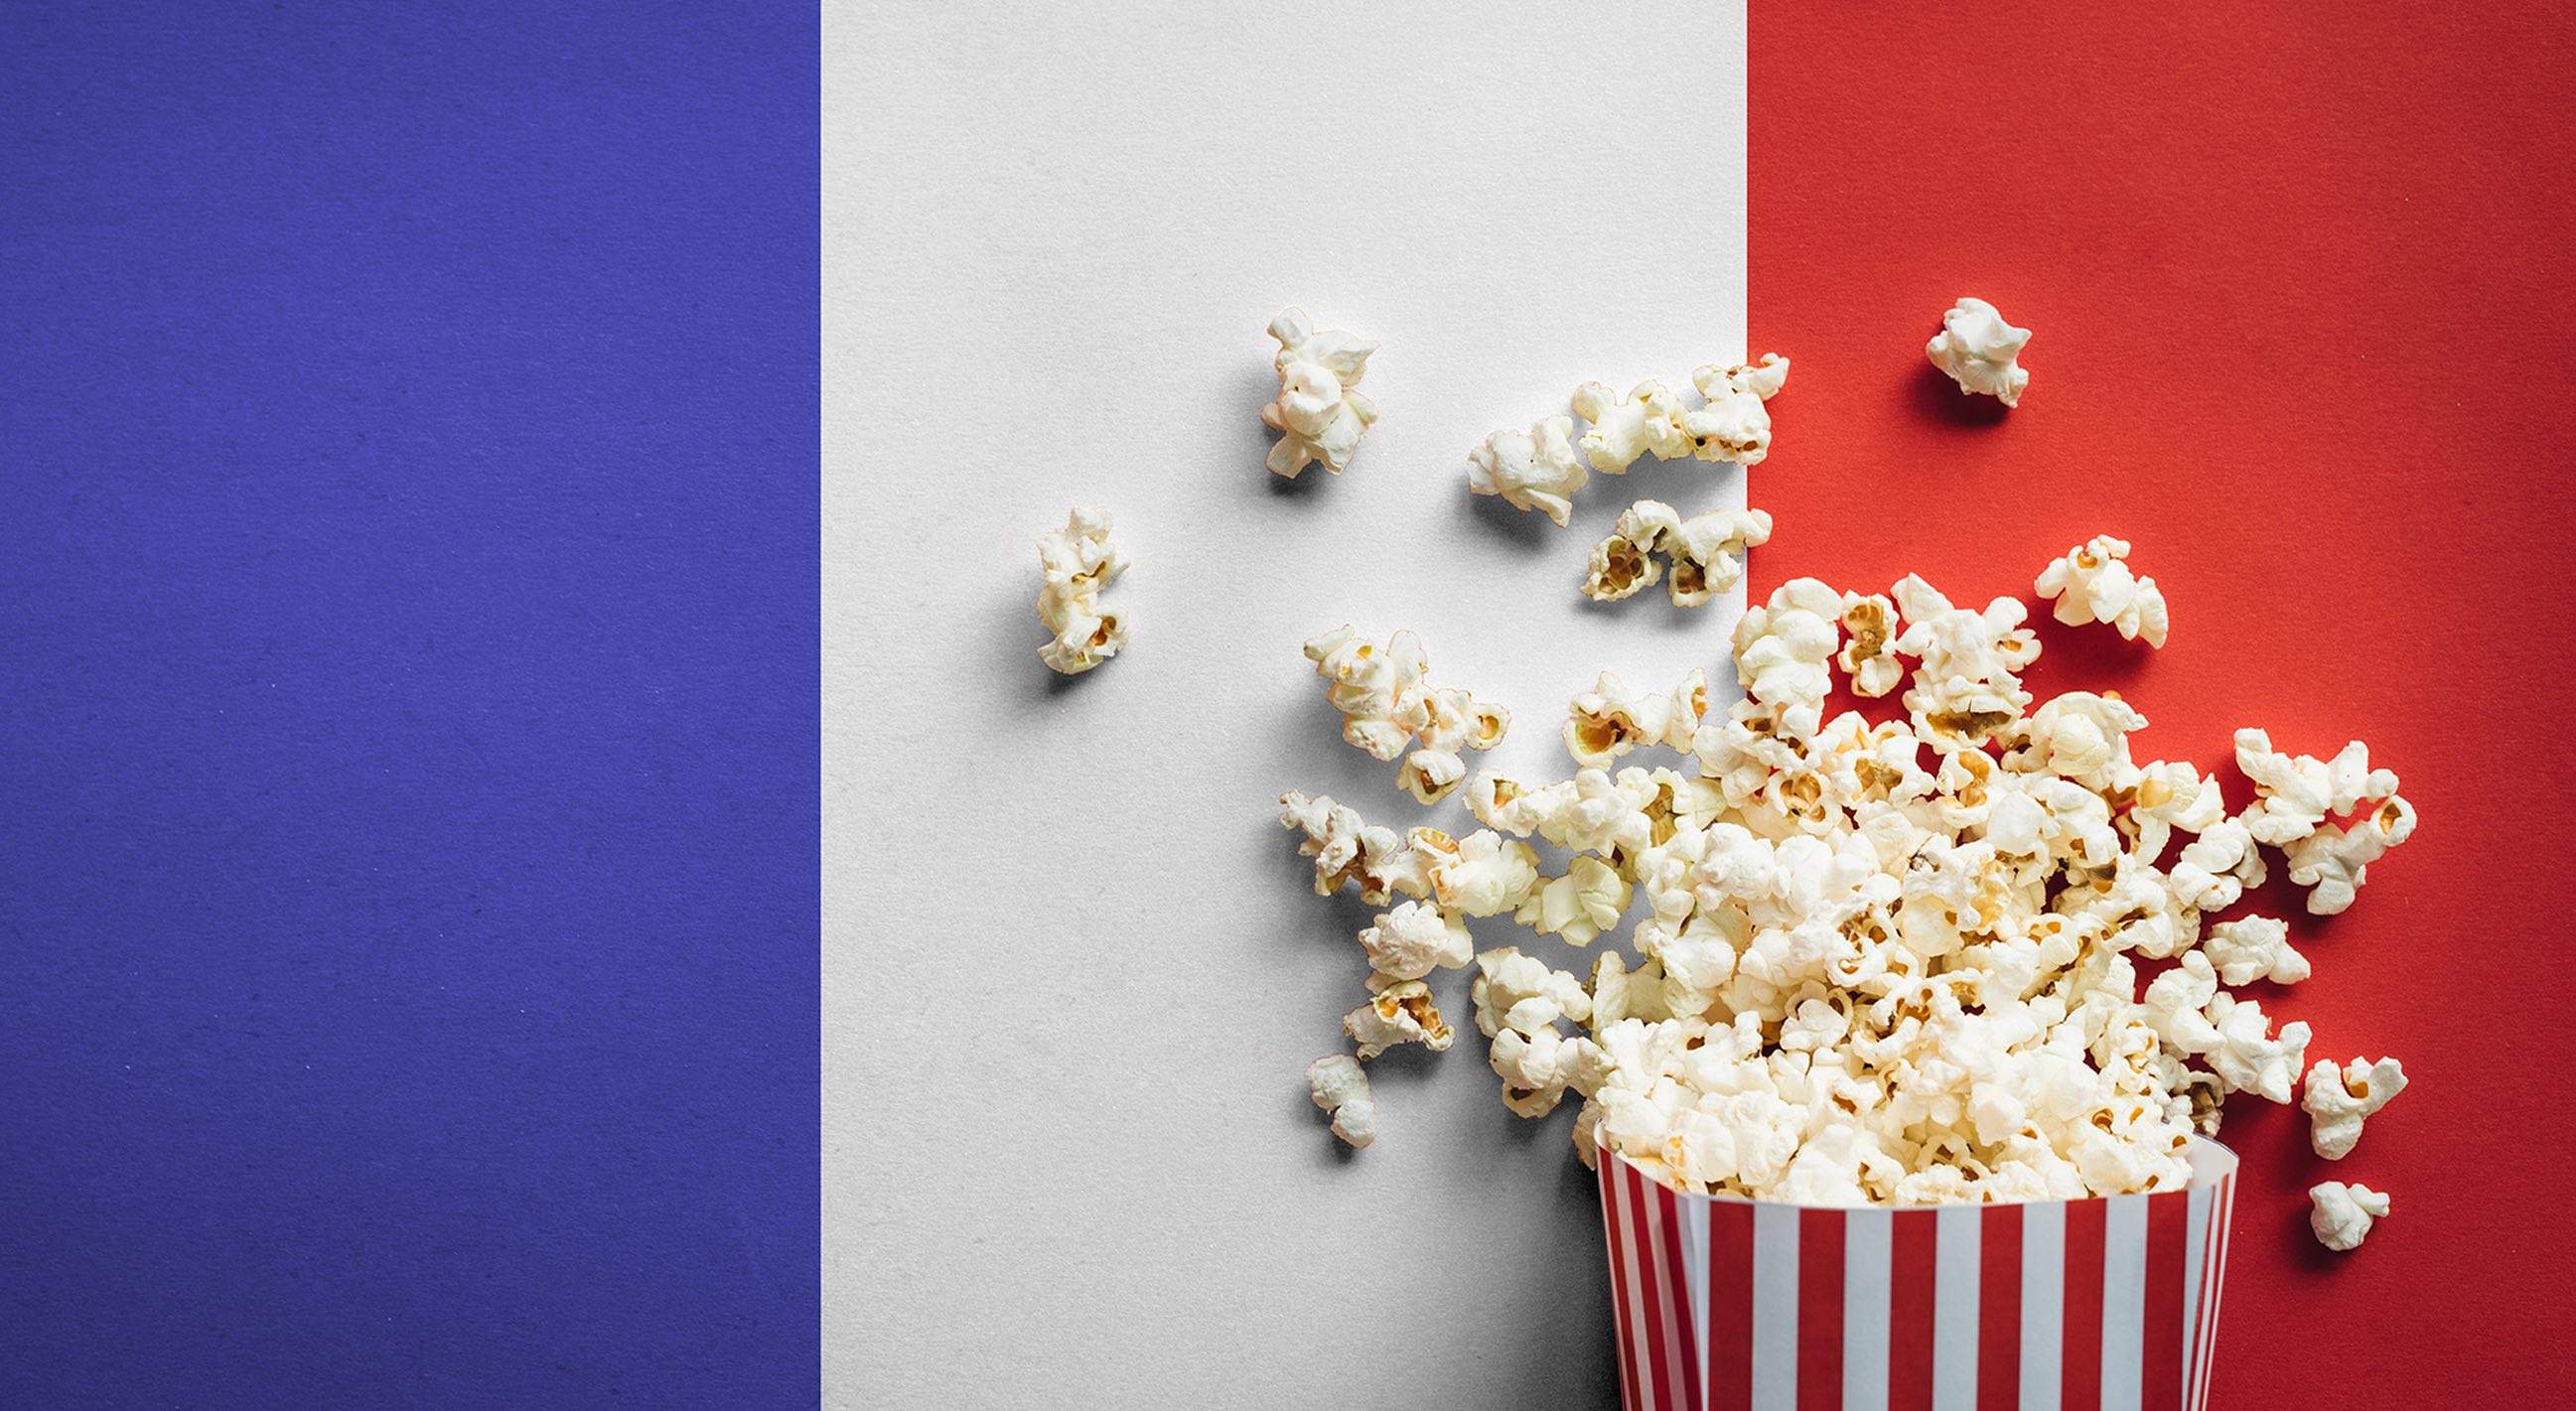 A box of popcorn superimposed over the French flag